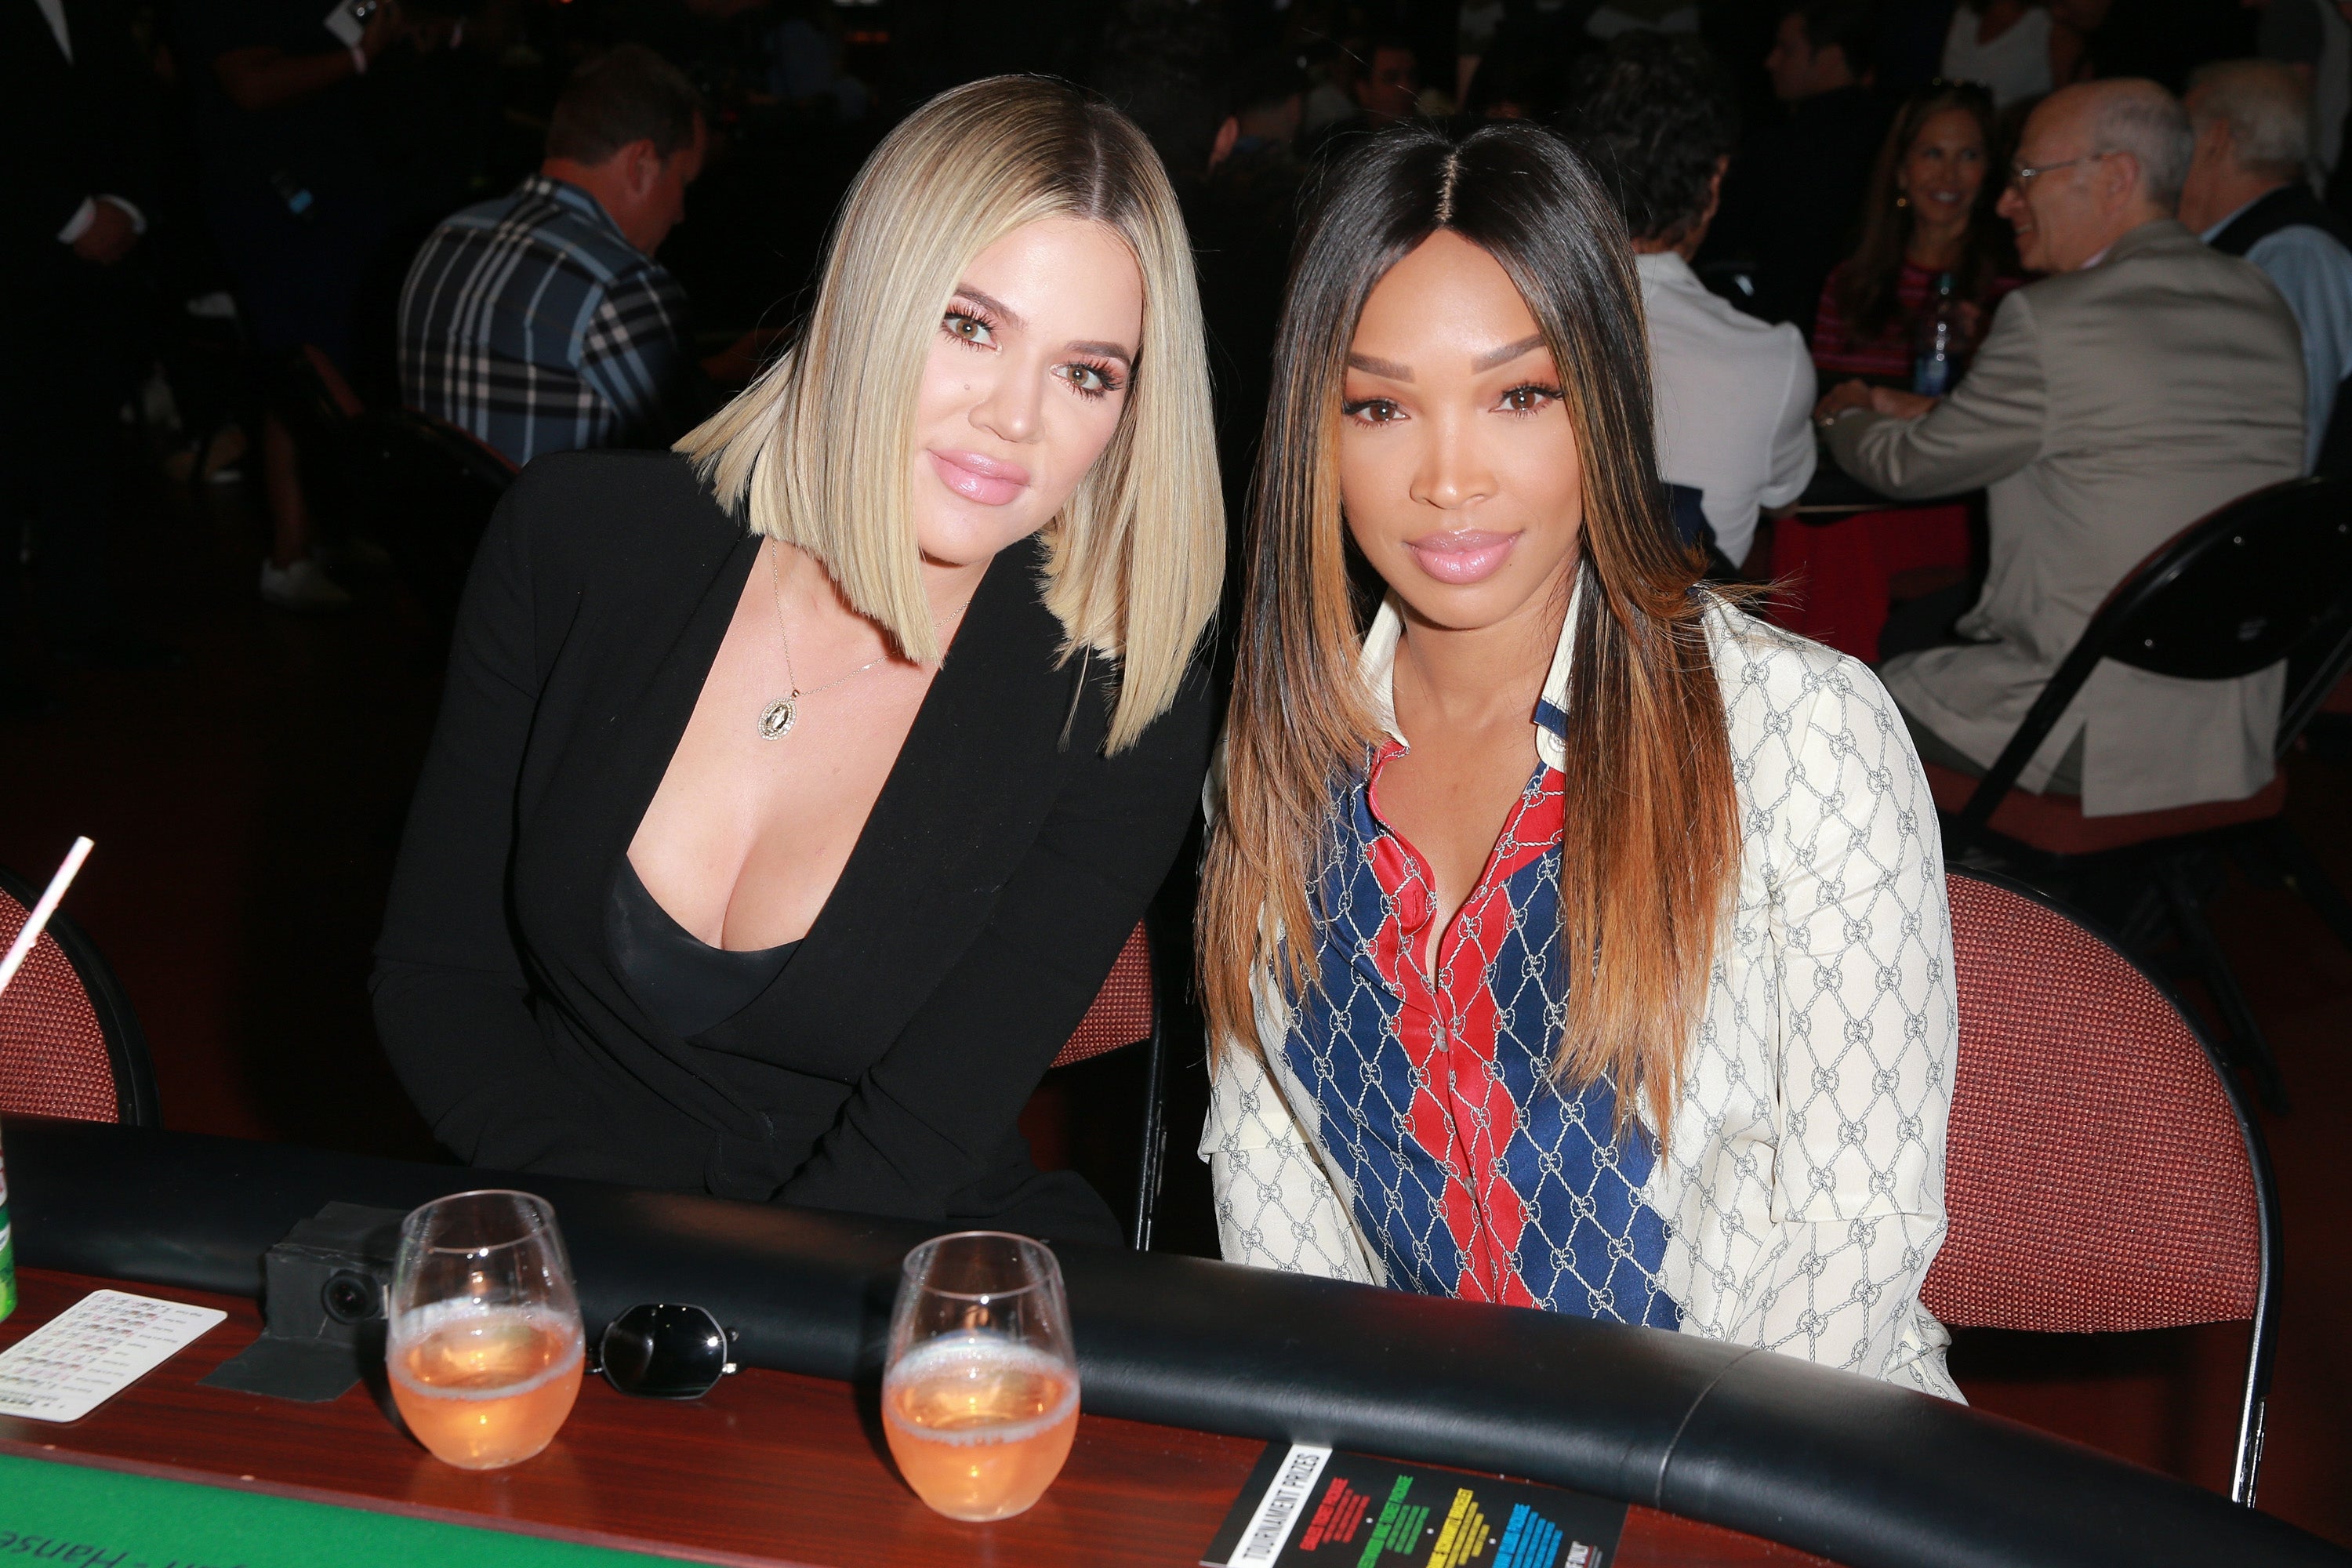 Khloe Kardashian's best friend seems to confirm her baby son's name after  months of secrecy